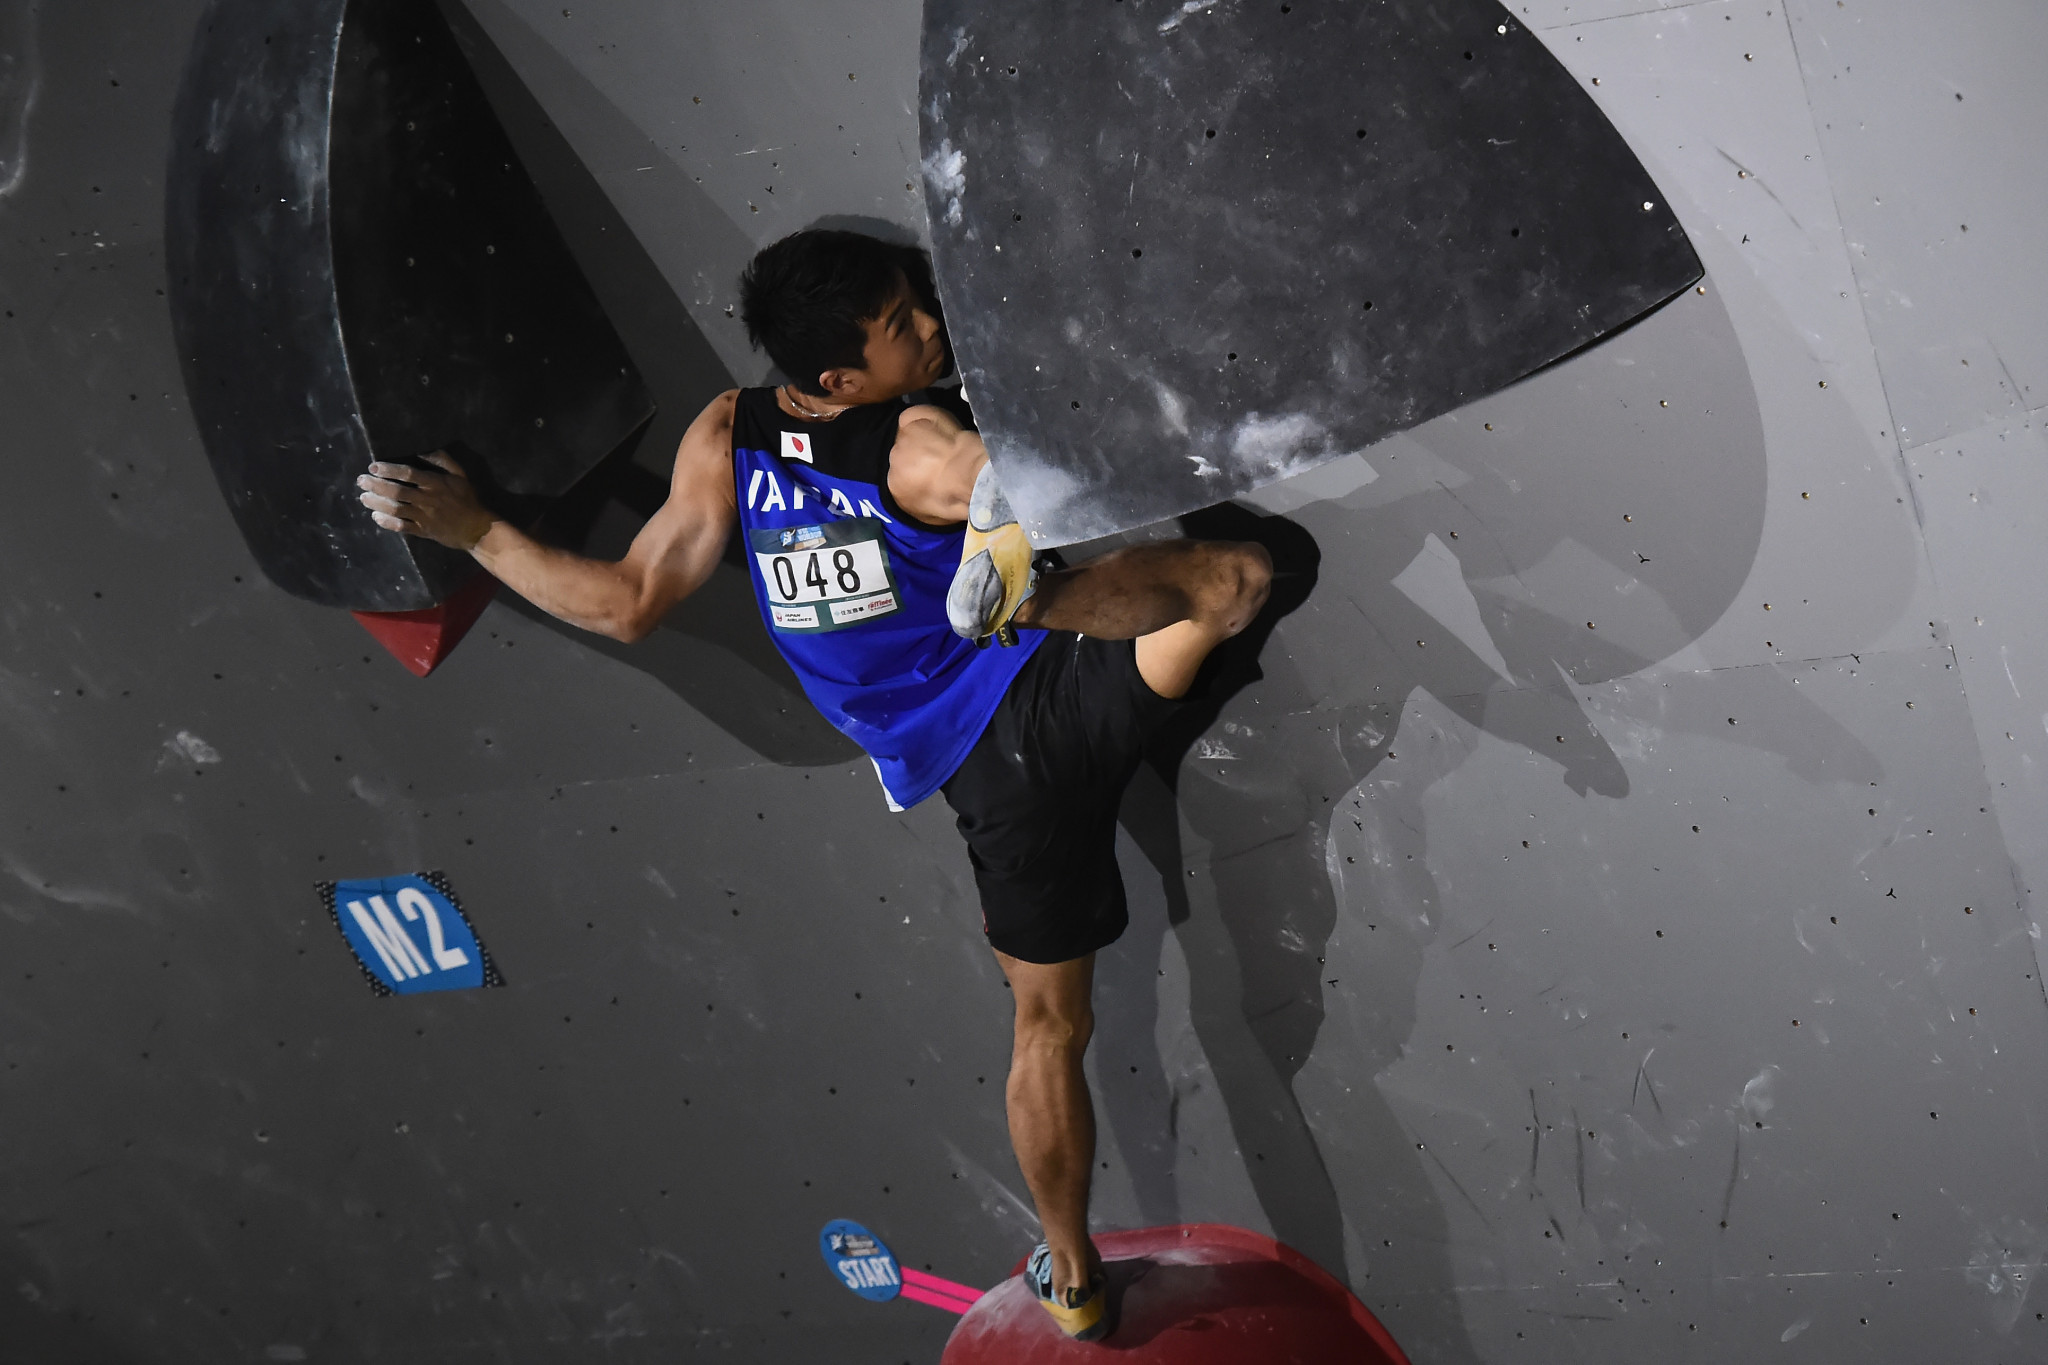 Japan's Rei Sugimoto came first in the men's bouldering semi-final at the IFSC Asian Championships in Kurayoshi ©Getty Images